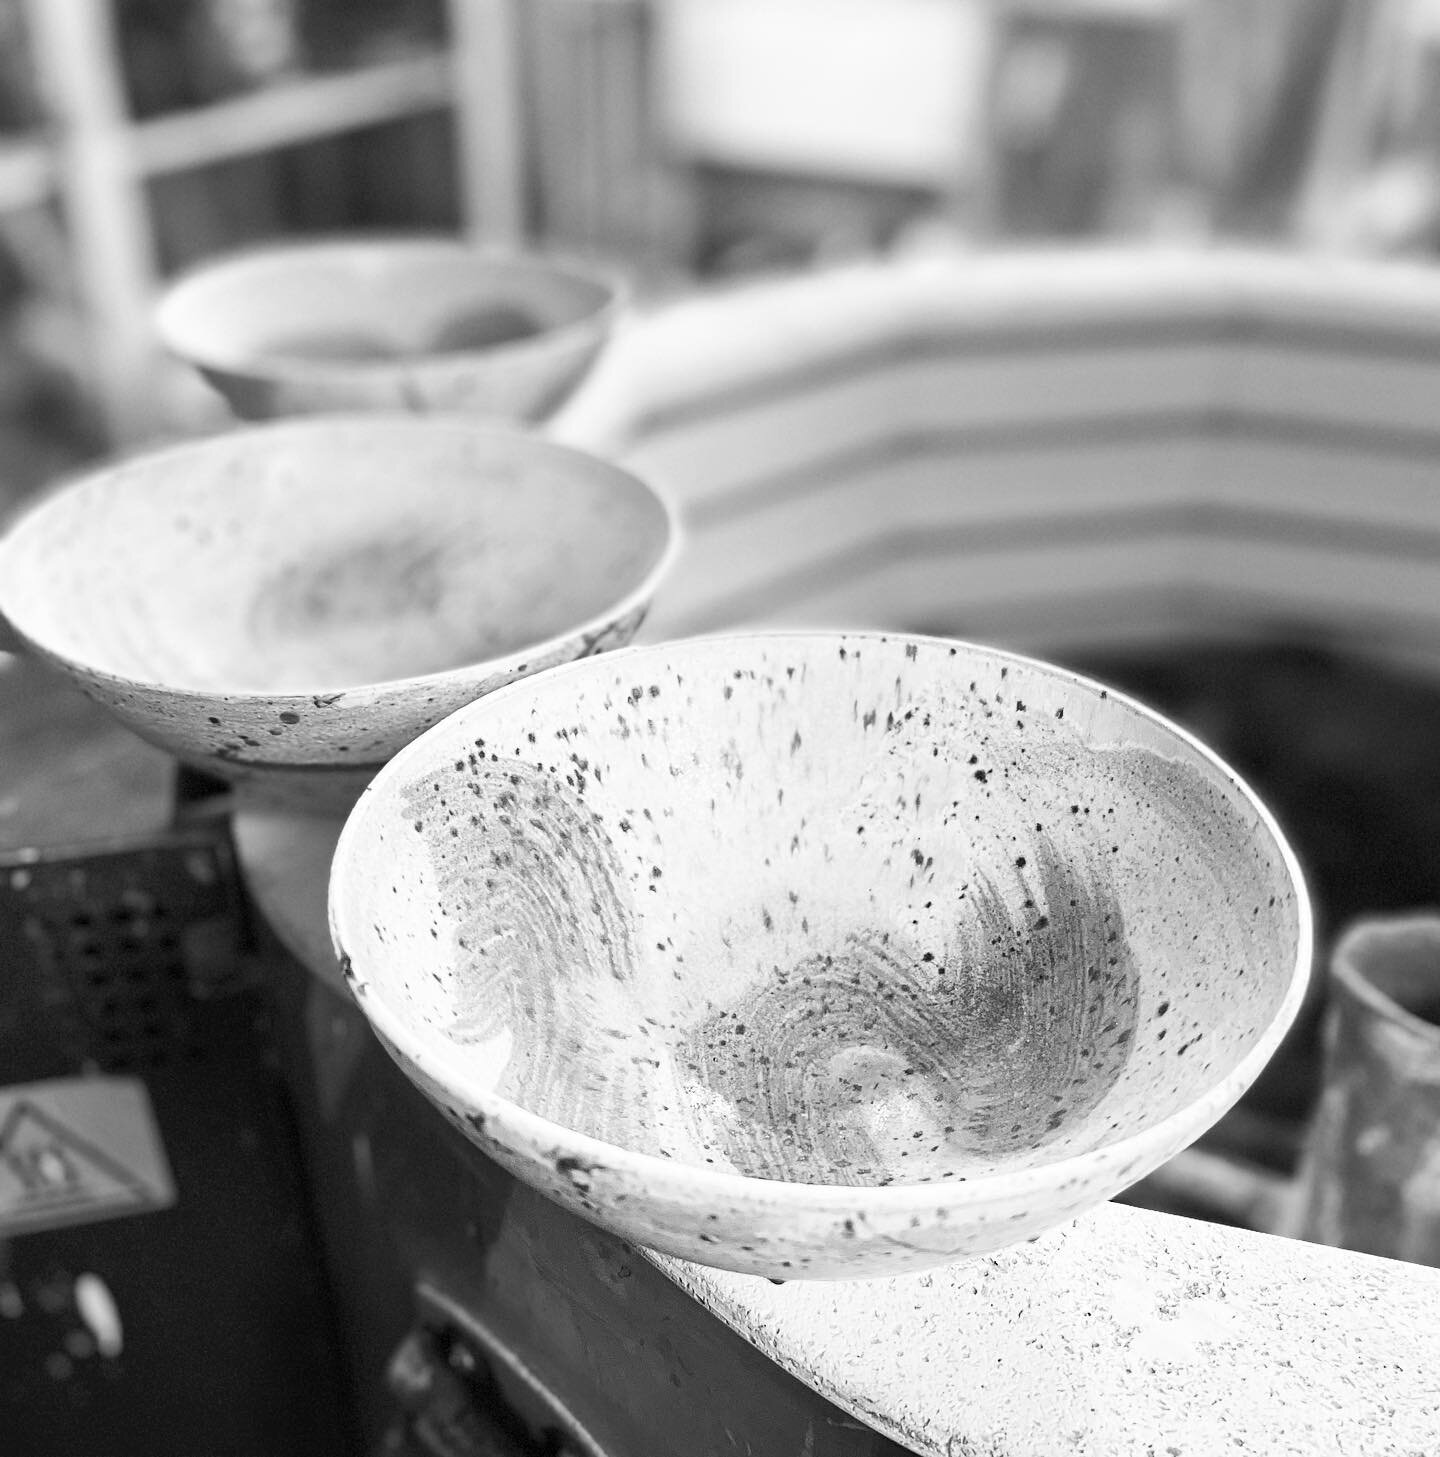 Ramen bowls. More to come. Each is uniquely decorated. White clay with iron flecks and black slip hakeme and a satin oatmeal fleck glaze. #handmade #hakeme #handmadeuk #thrown